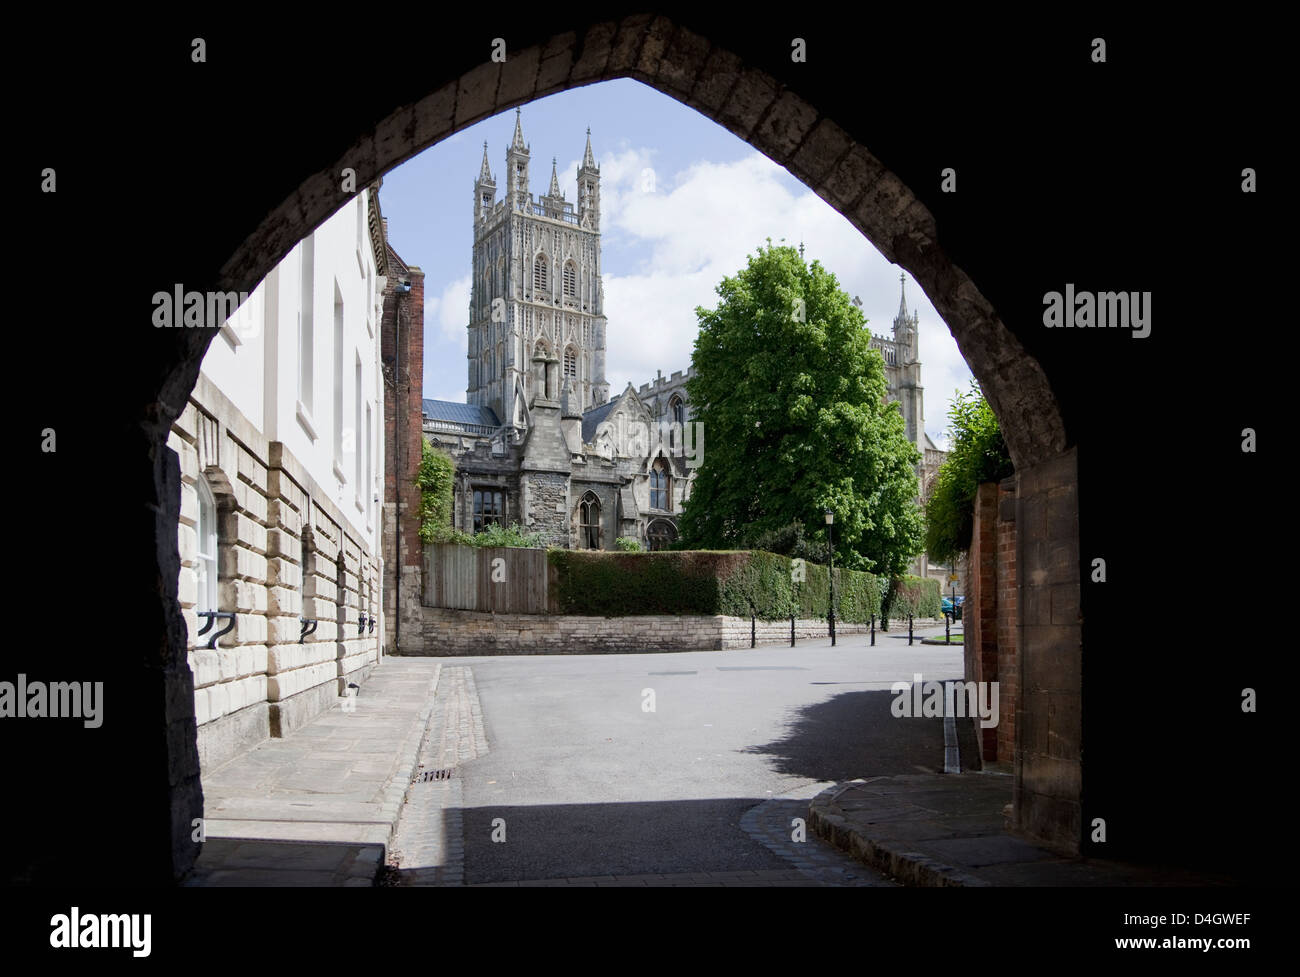 Gloucester Cathedral from the northwest, seen from St. Marys Gate, Gloucester, Gloucestershire, England, UK Stock Photo